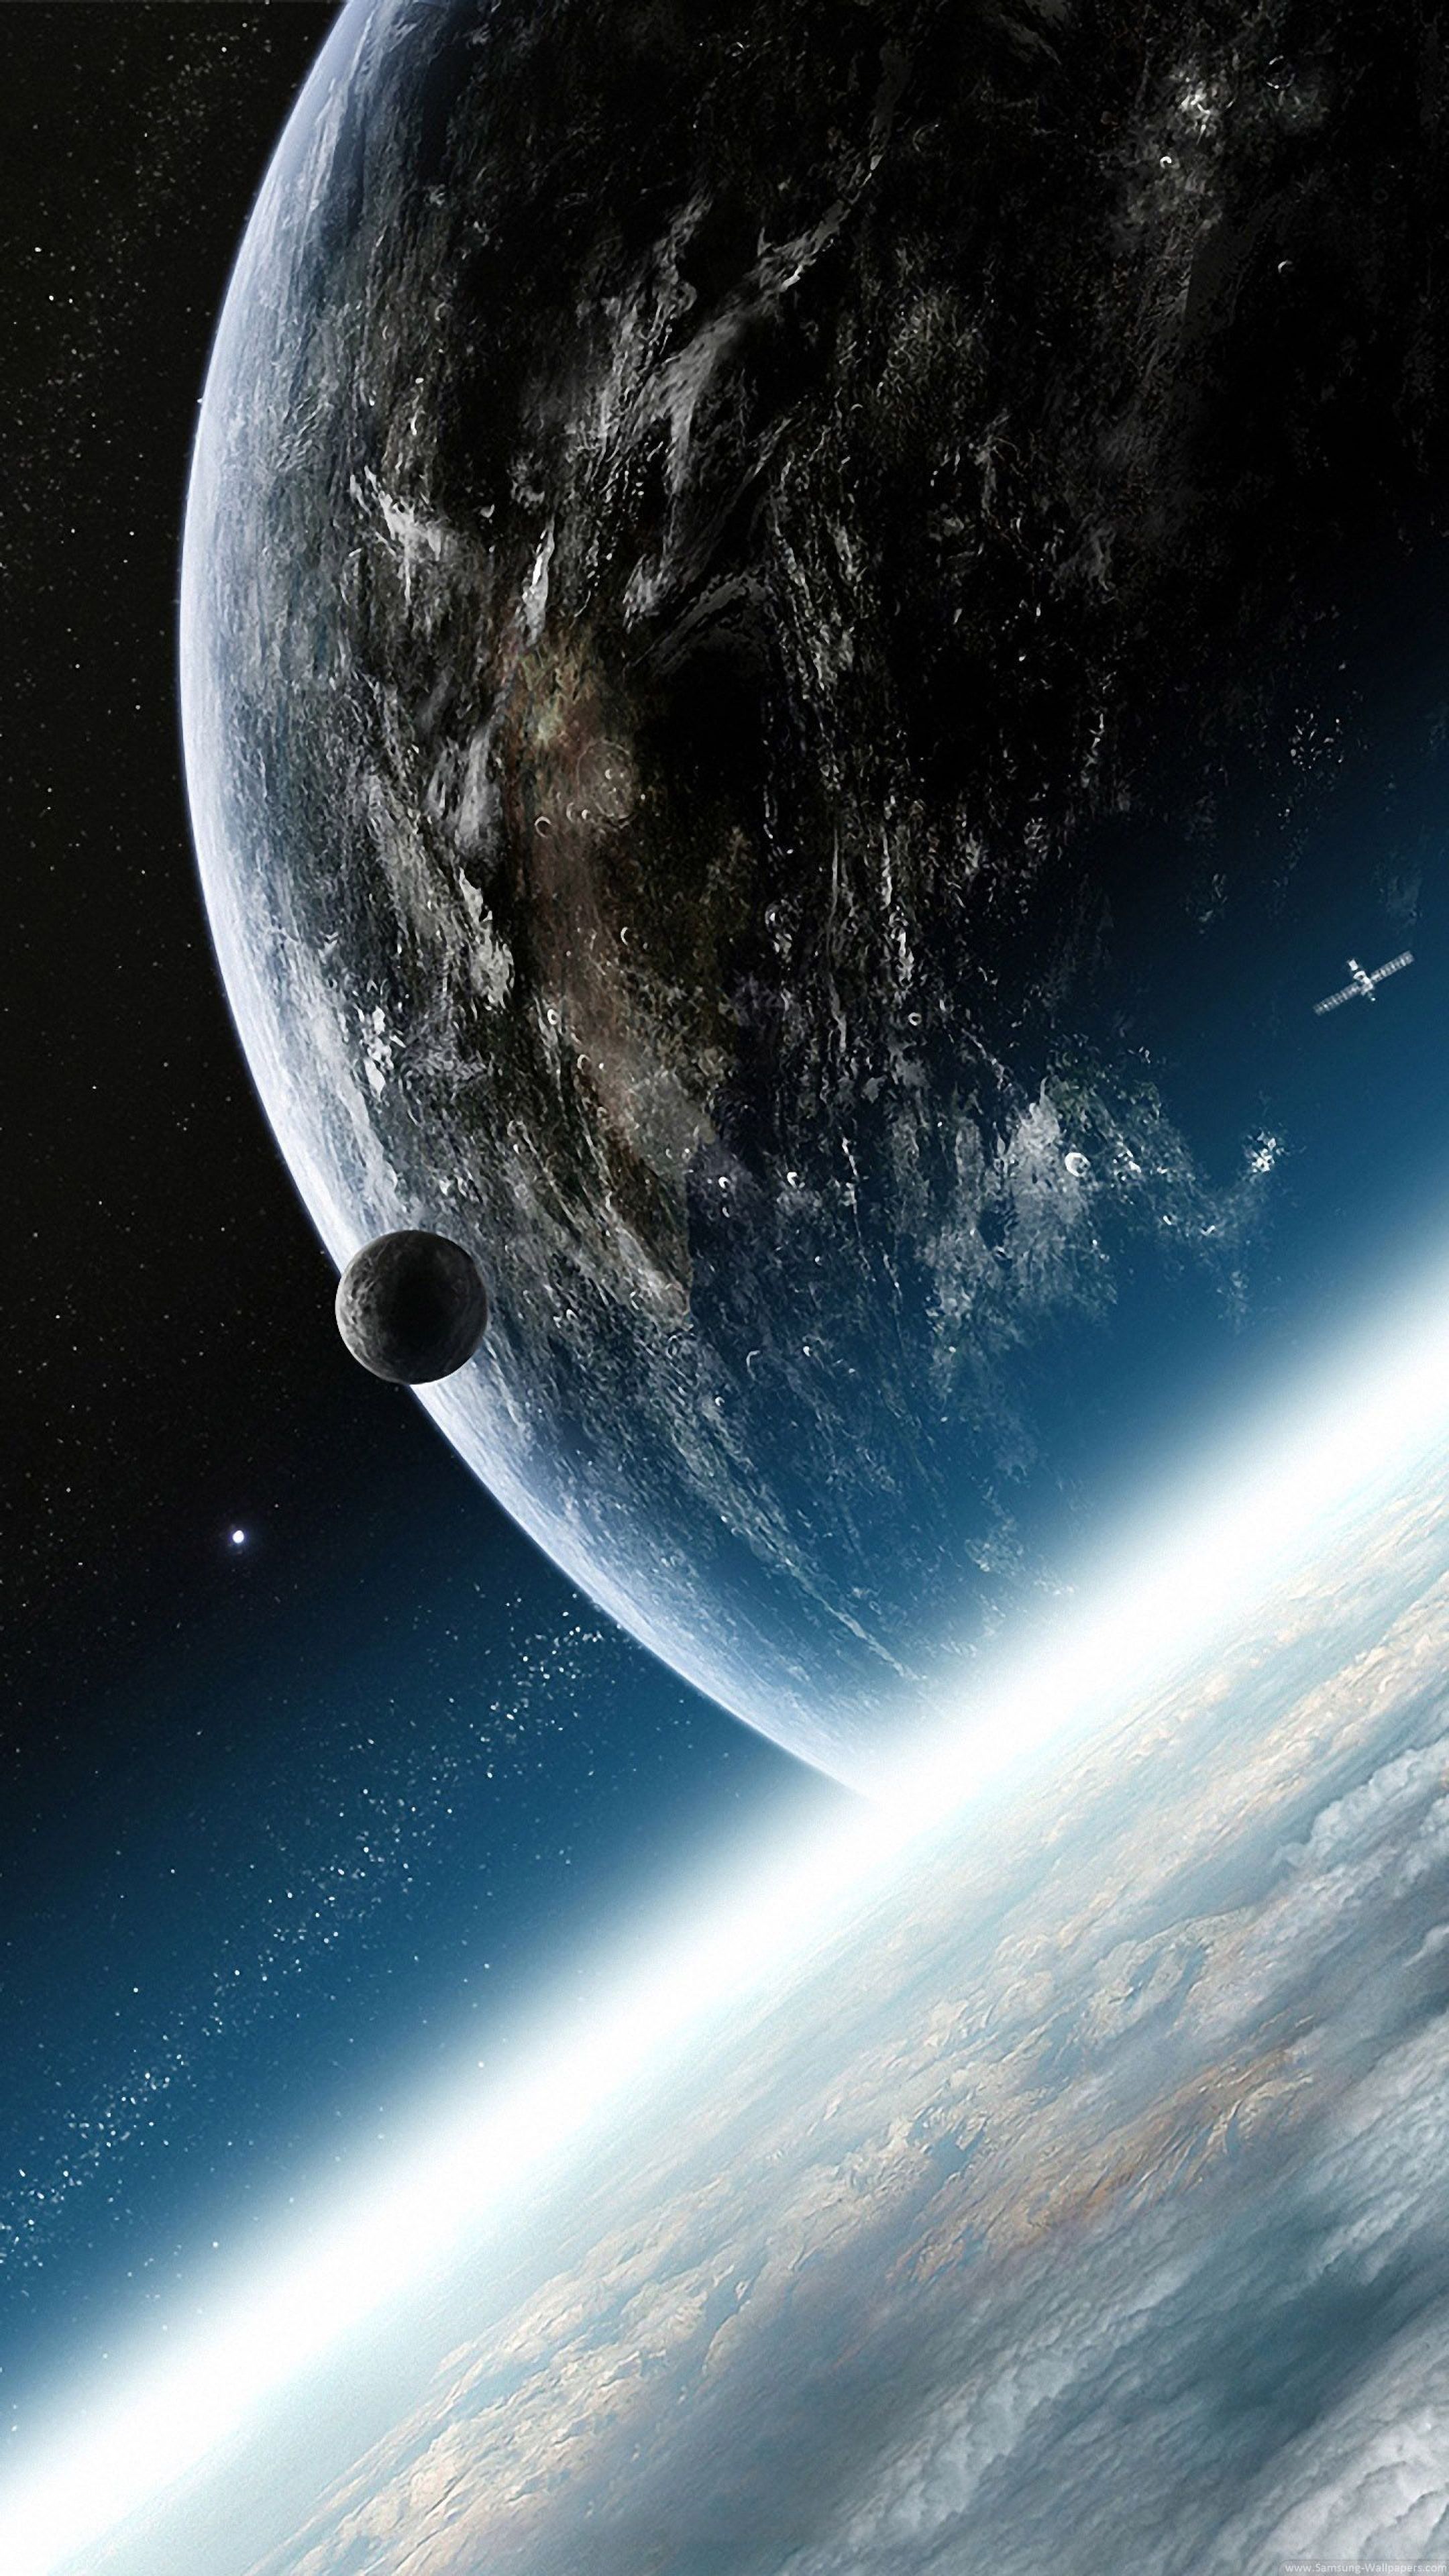 Ultra HD 4K Image for Mobile earth from space mobile phone wallpaper. Wallpaper space, Space phone wallpaper, Space iphone wallpaper